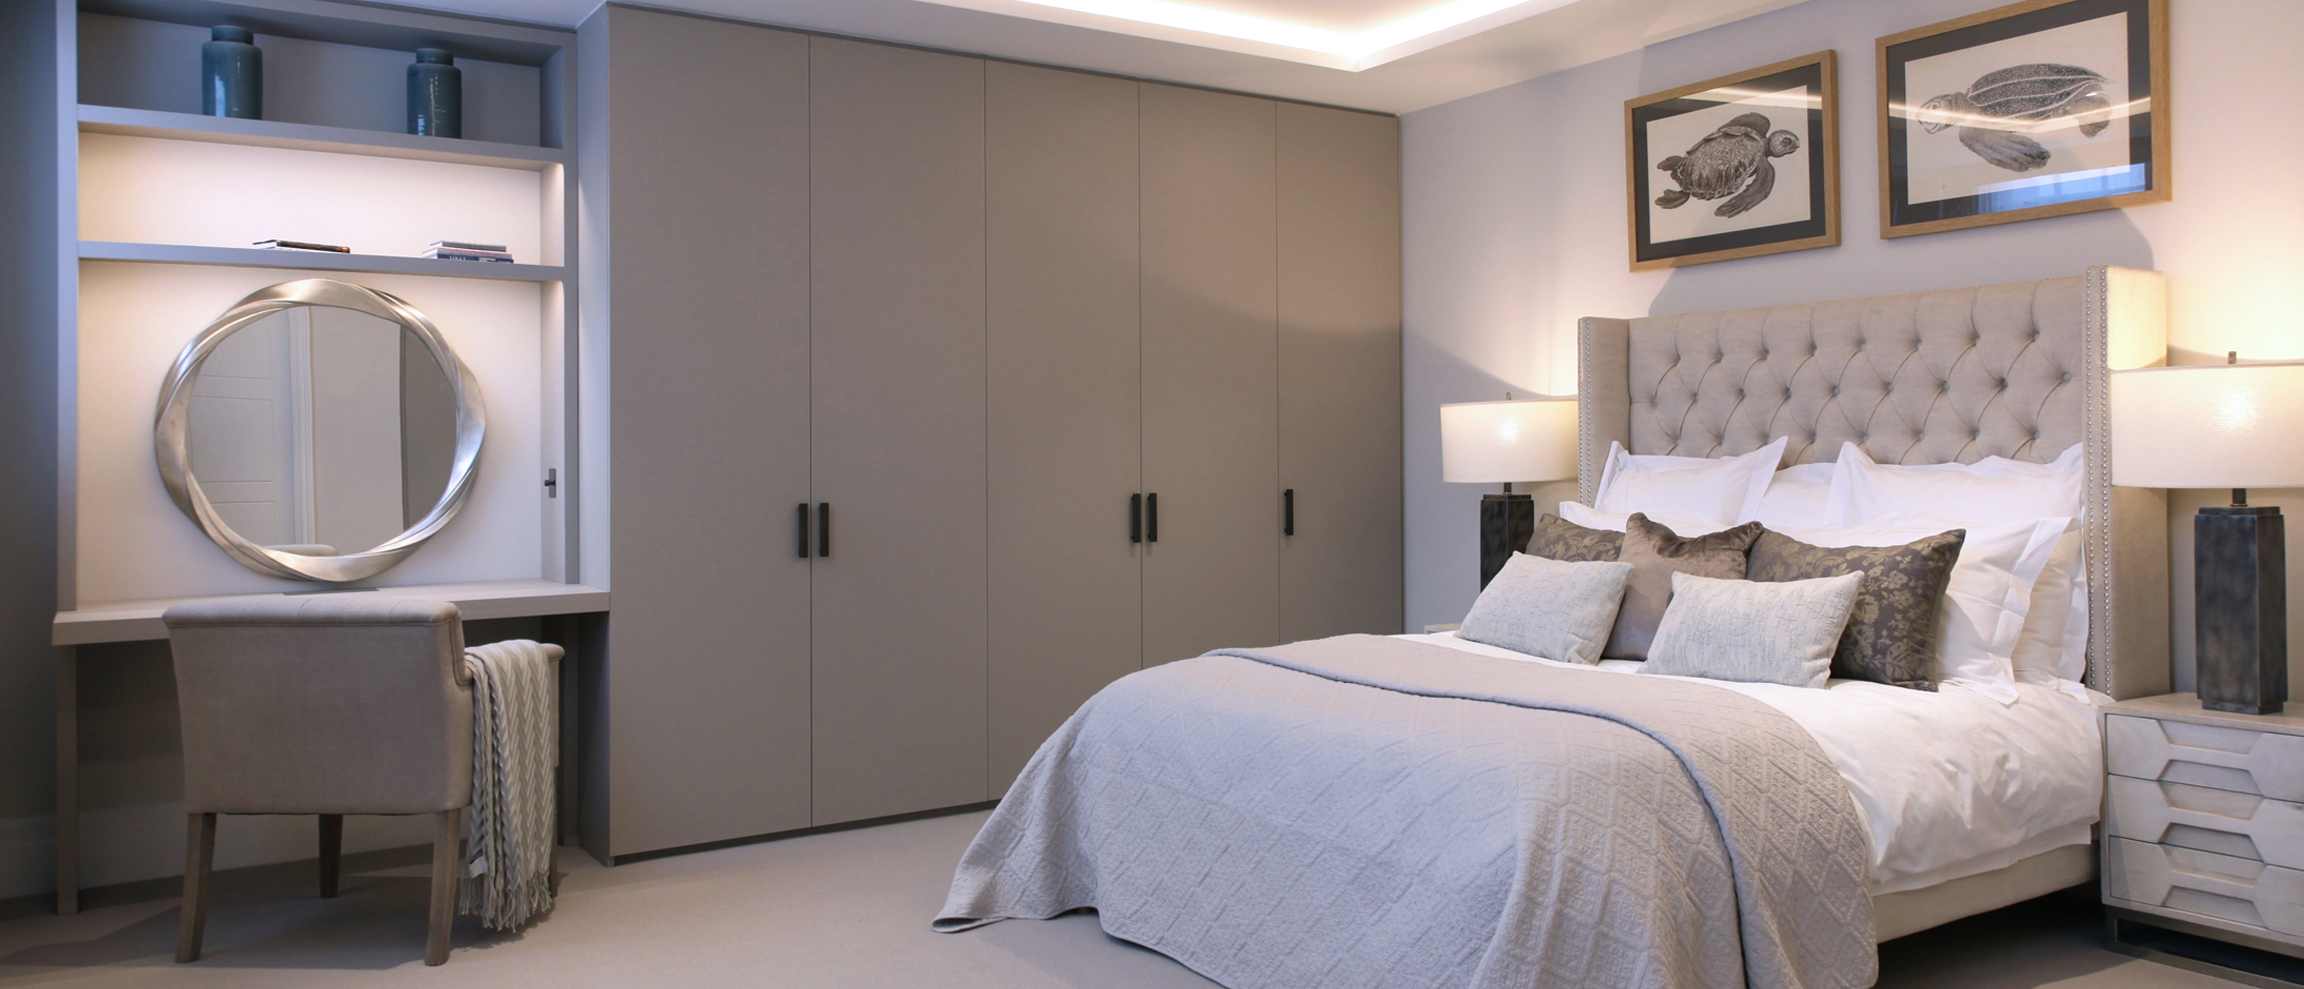 Bespoke fitted wardrobes in bedroom